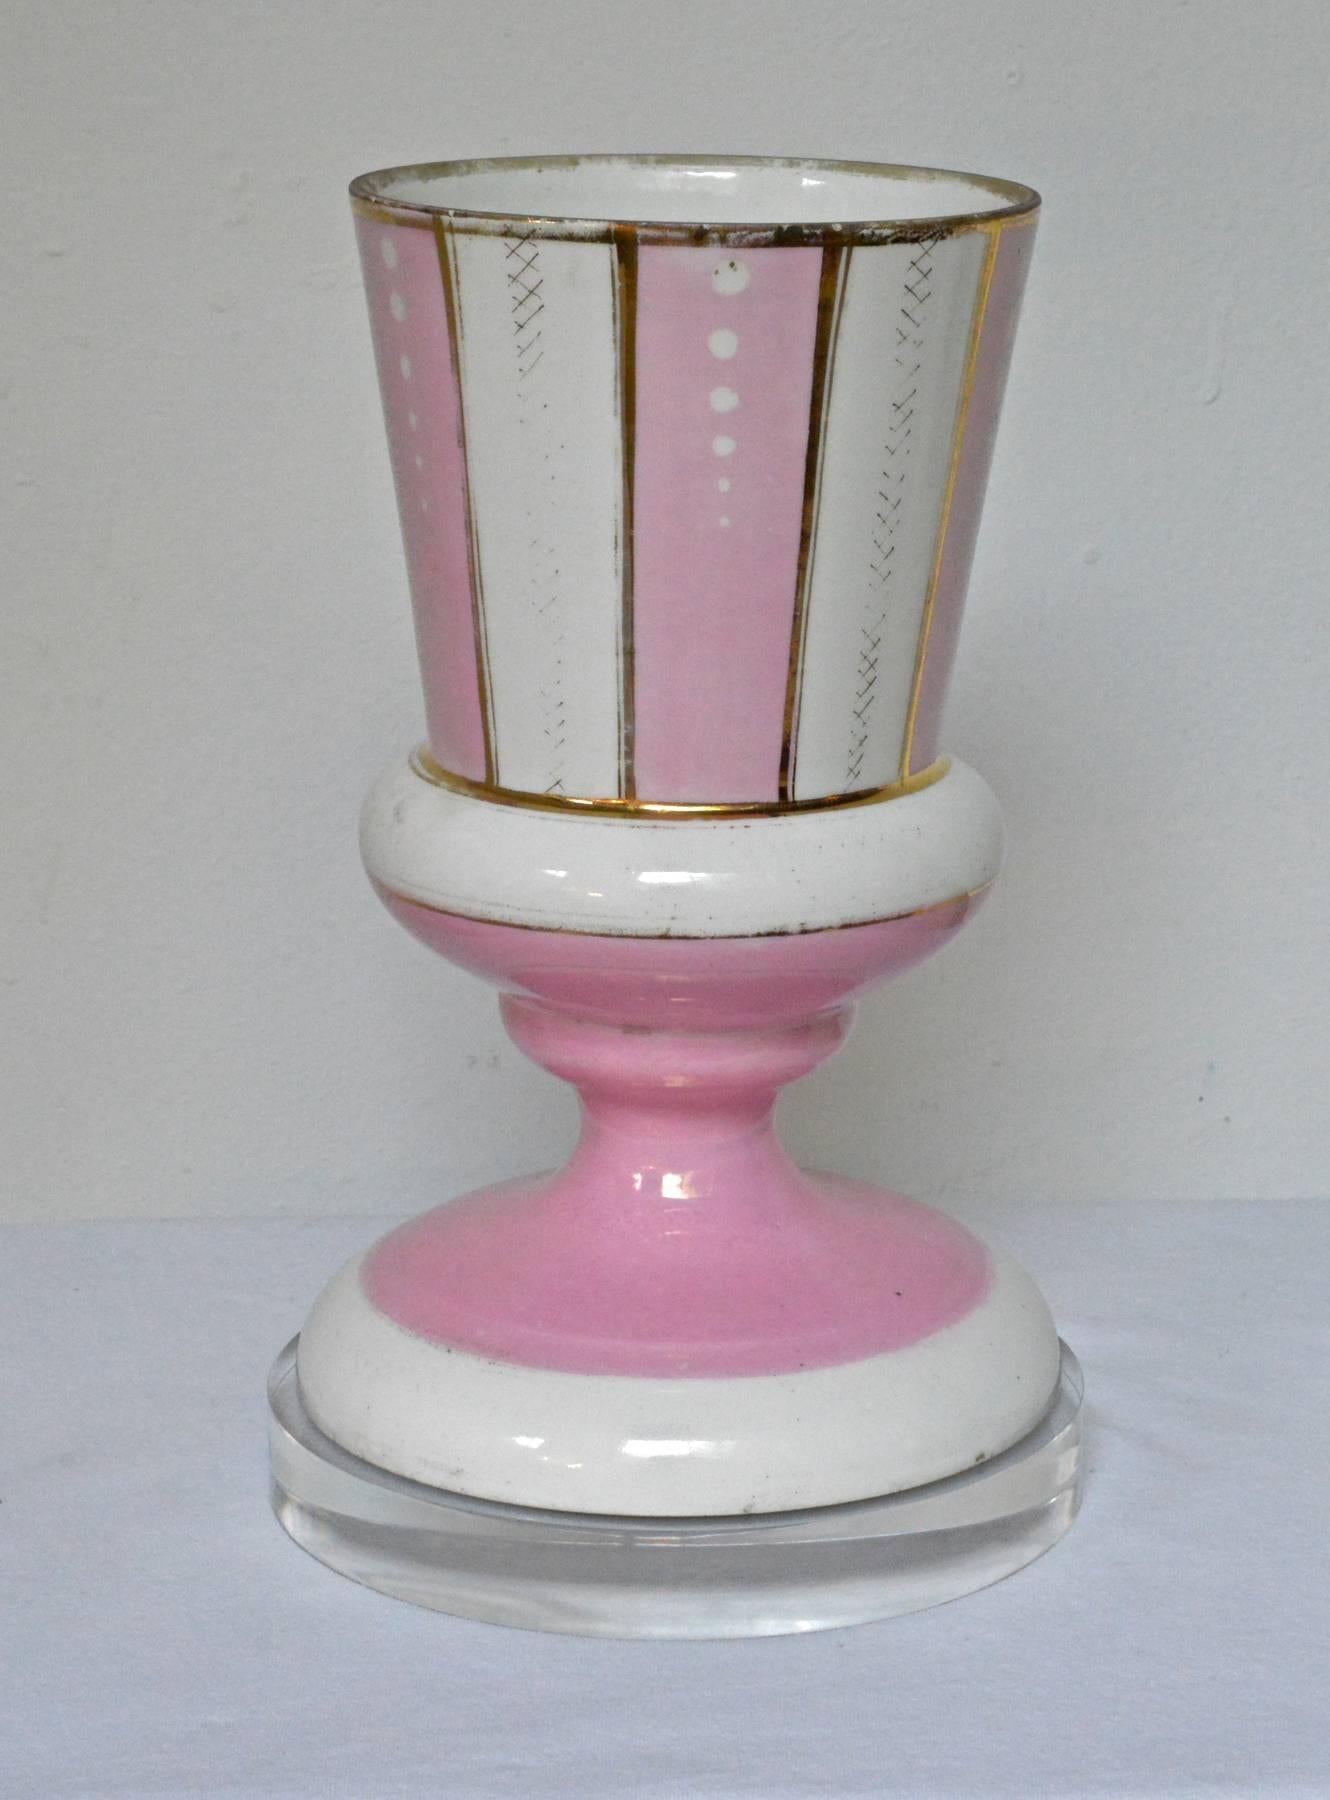 A pair of old Paris jardinières mounted on custom Lucite risers. The vibrant pink porcelain cache are late 19th century and were made by the German company C. Tielsch & Co. Stamped and signed underneath.